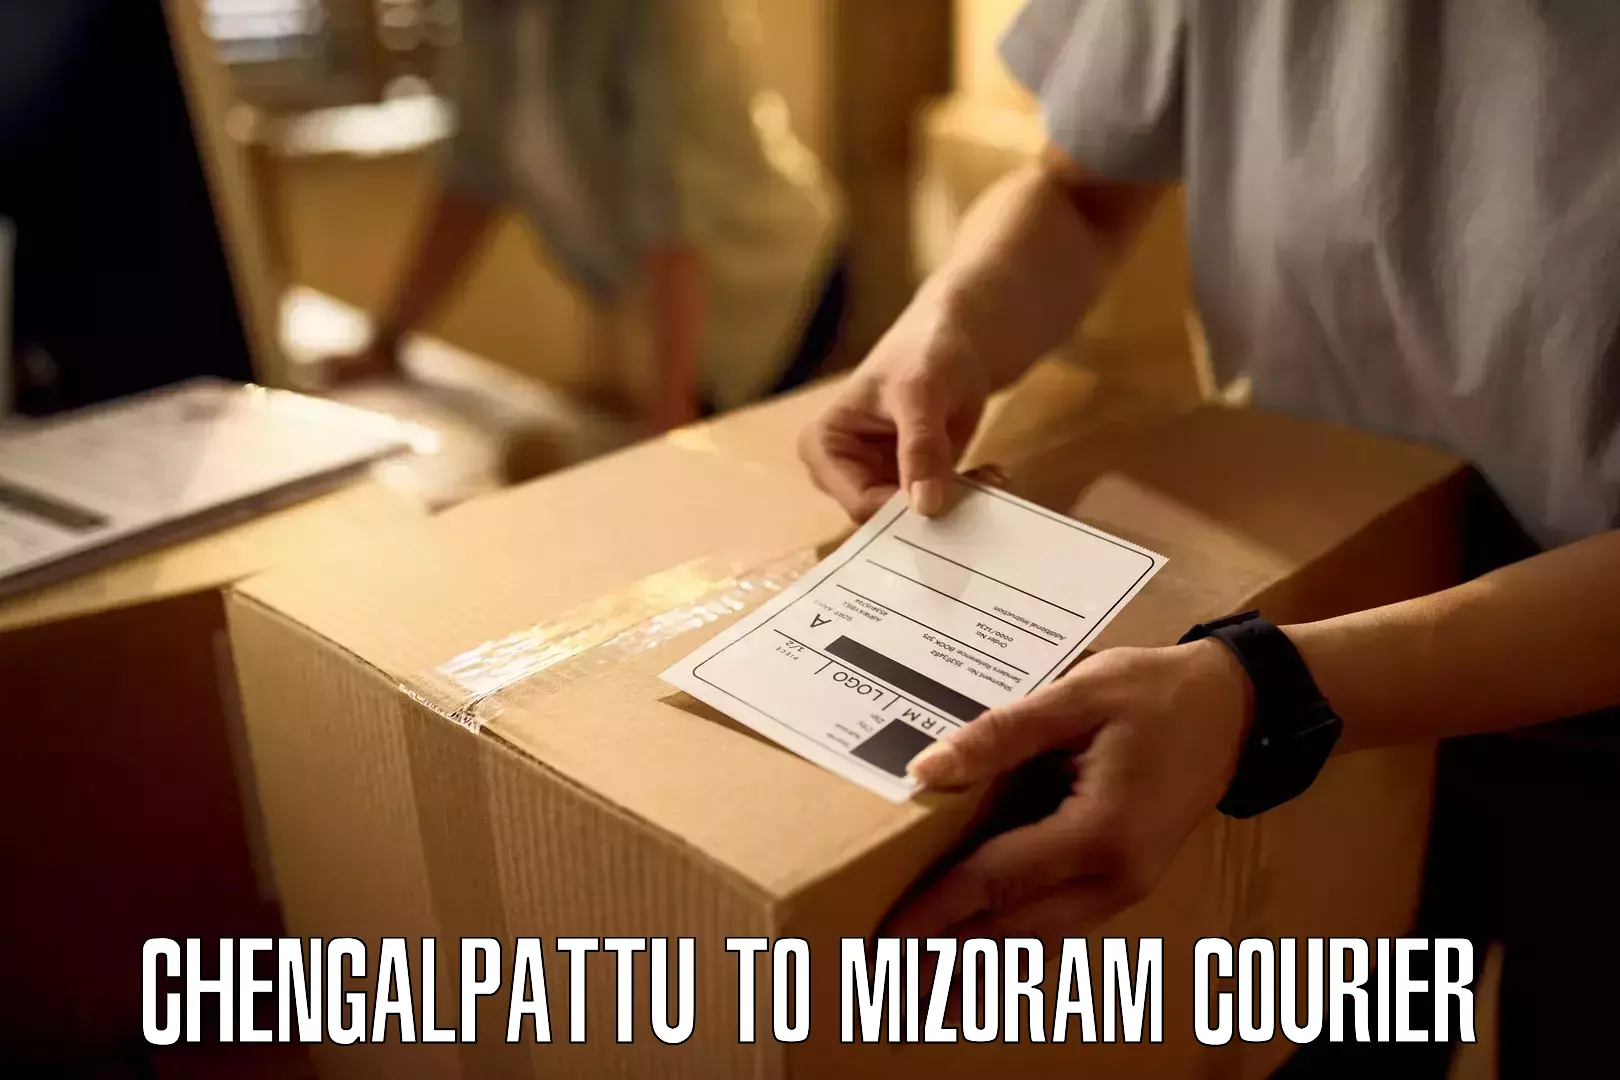 On-call courier service Chengalpattu to Darlawn